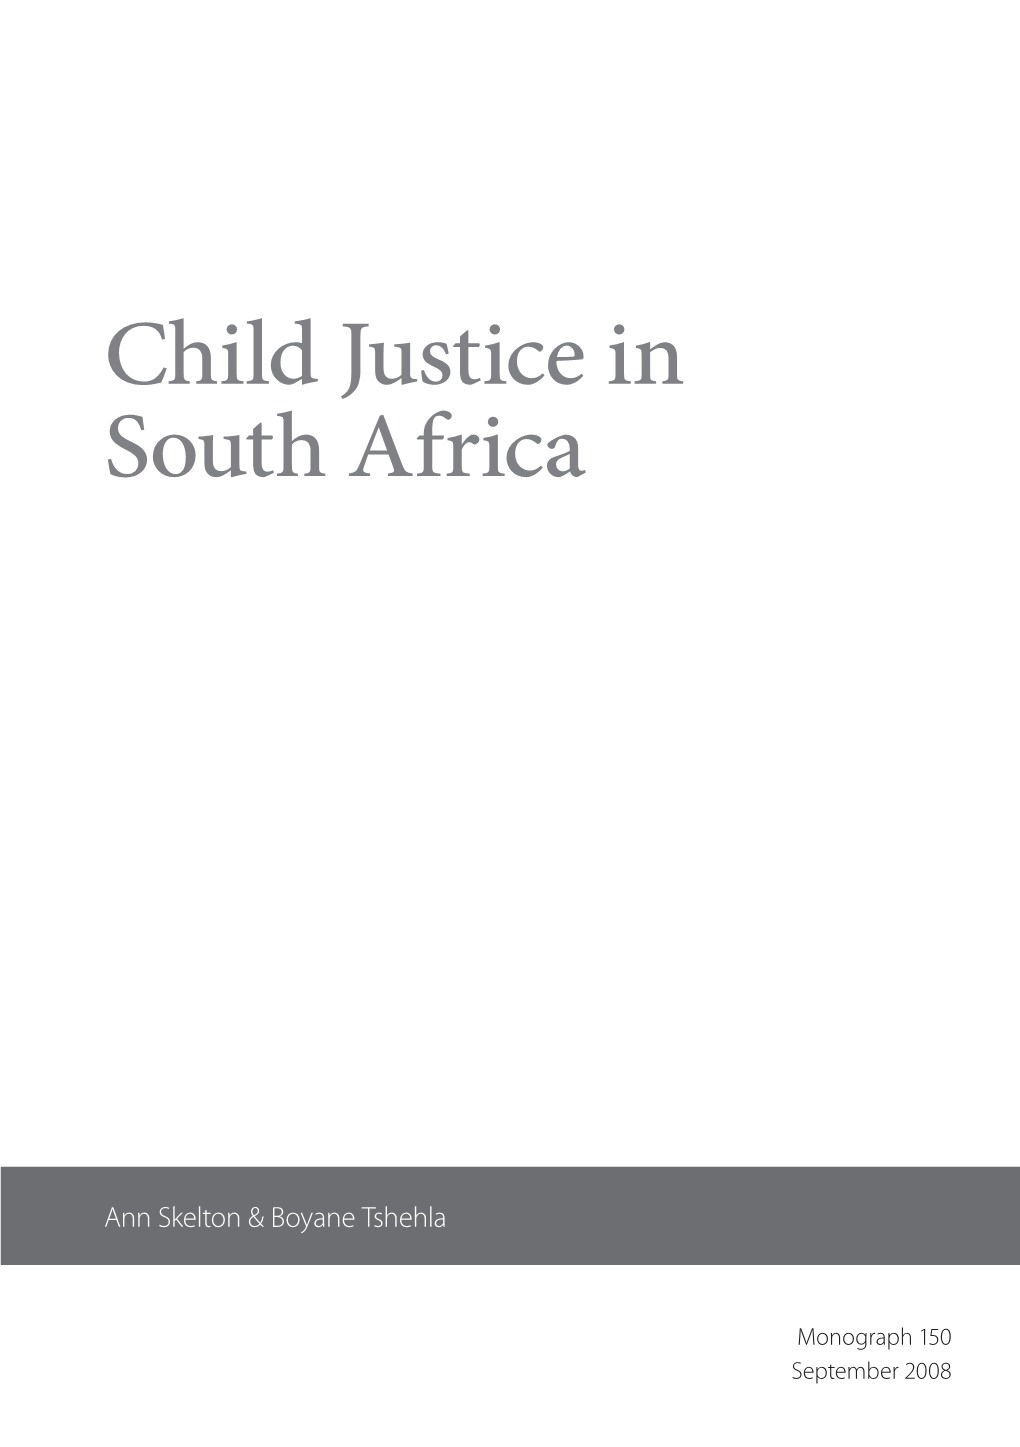 Child Justice in South Africa